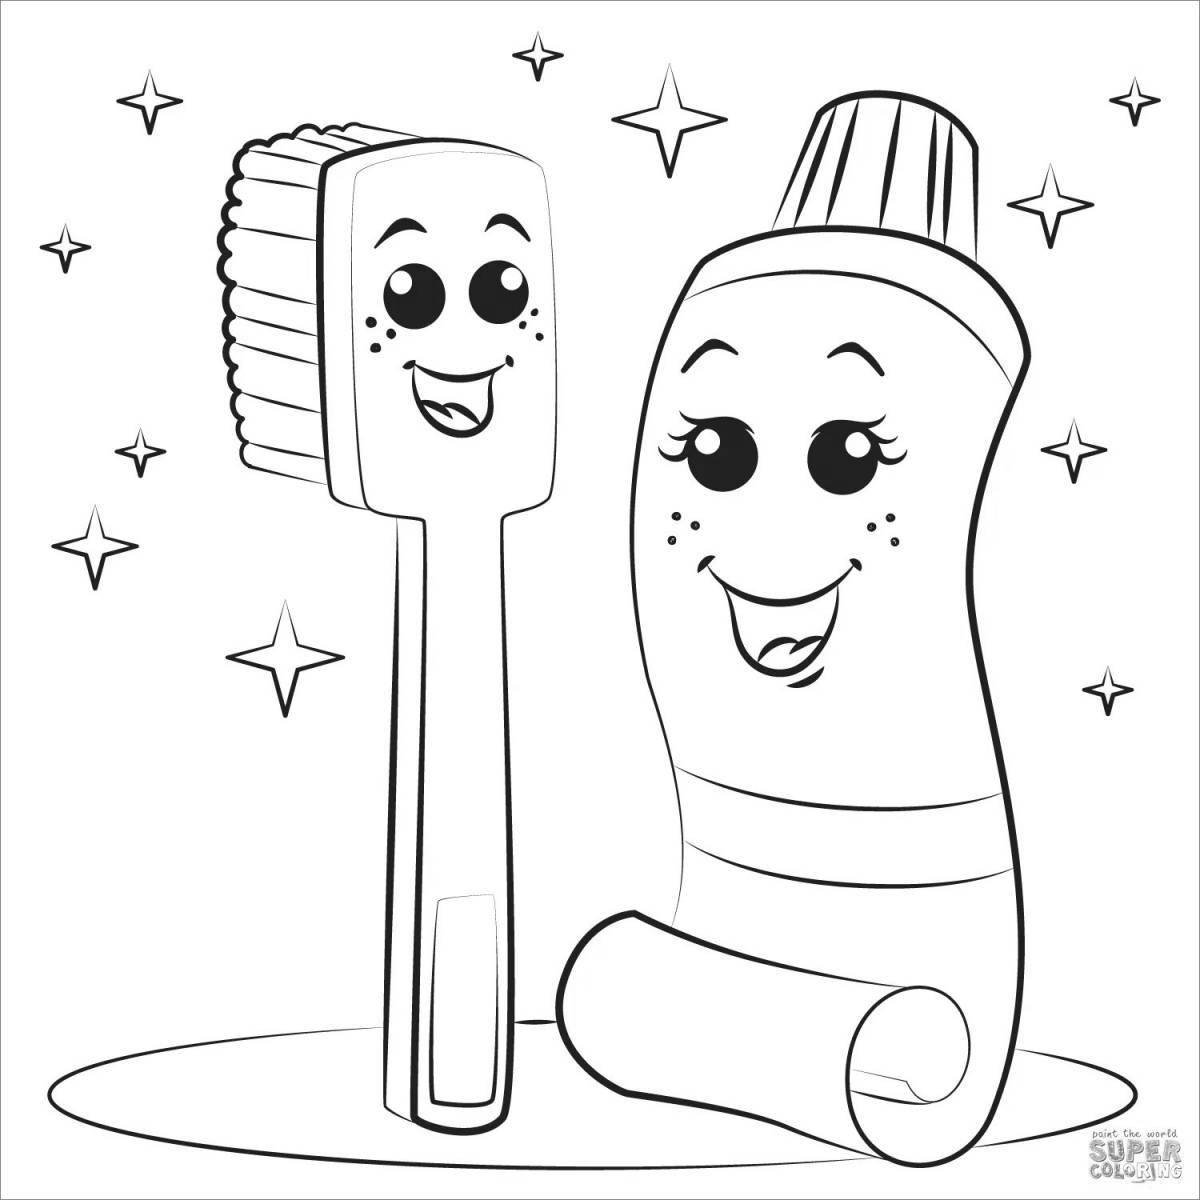 Adorable toothbrush coloring book for kids